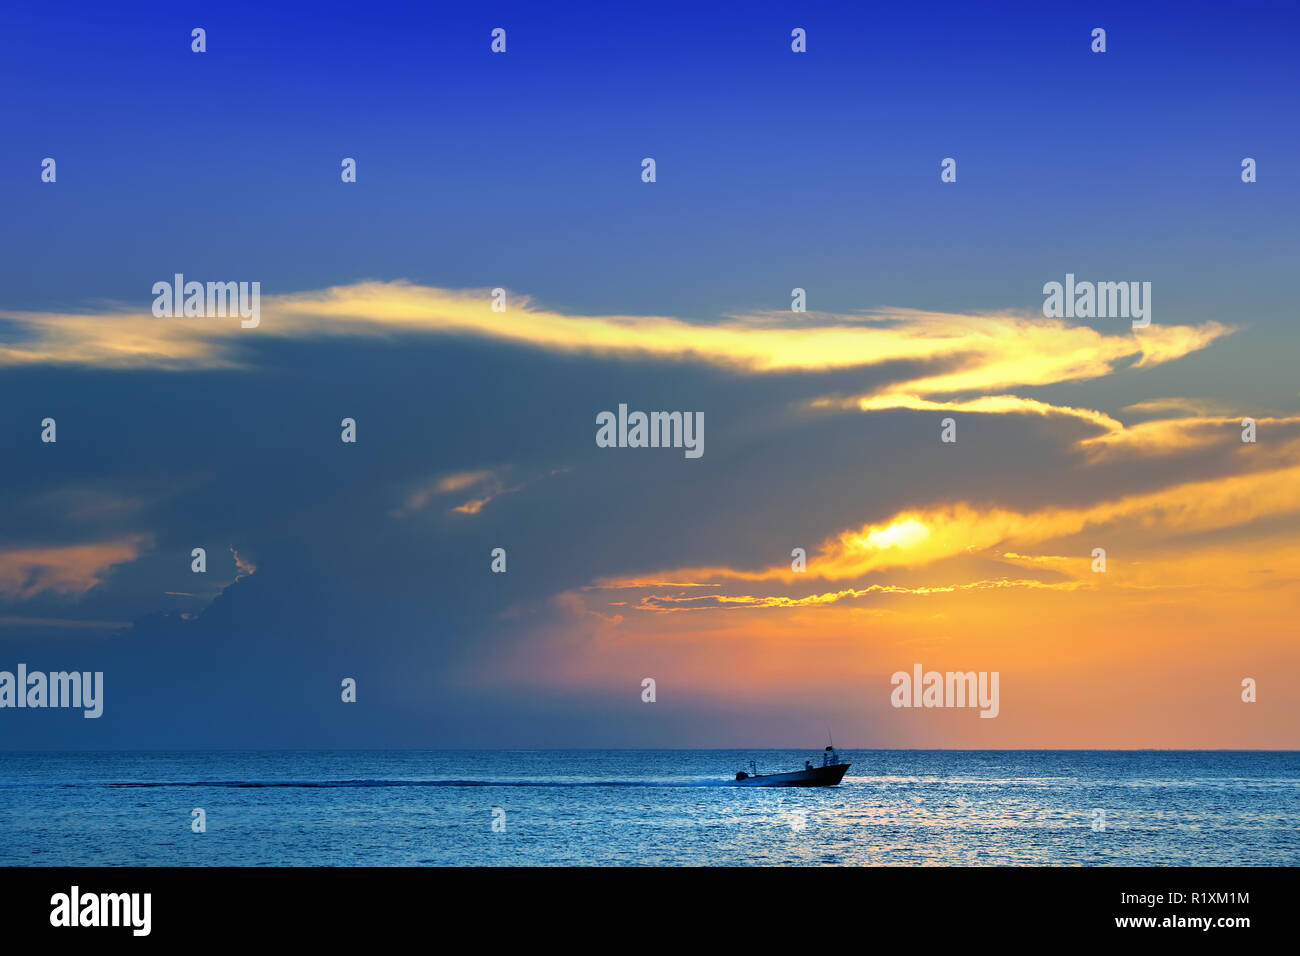 Colorful seascape image with shiny sea and speedboat over cloudy sky and sun during sunset in Cozumel, Mexico Stock Photo